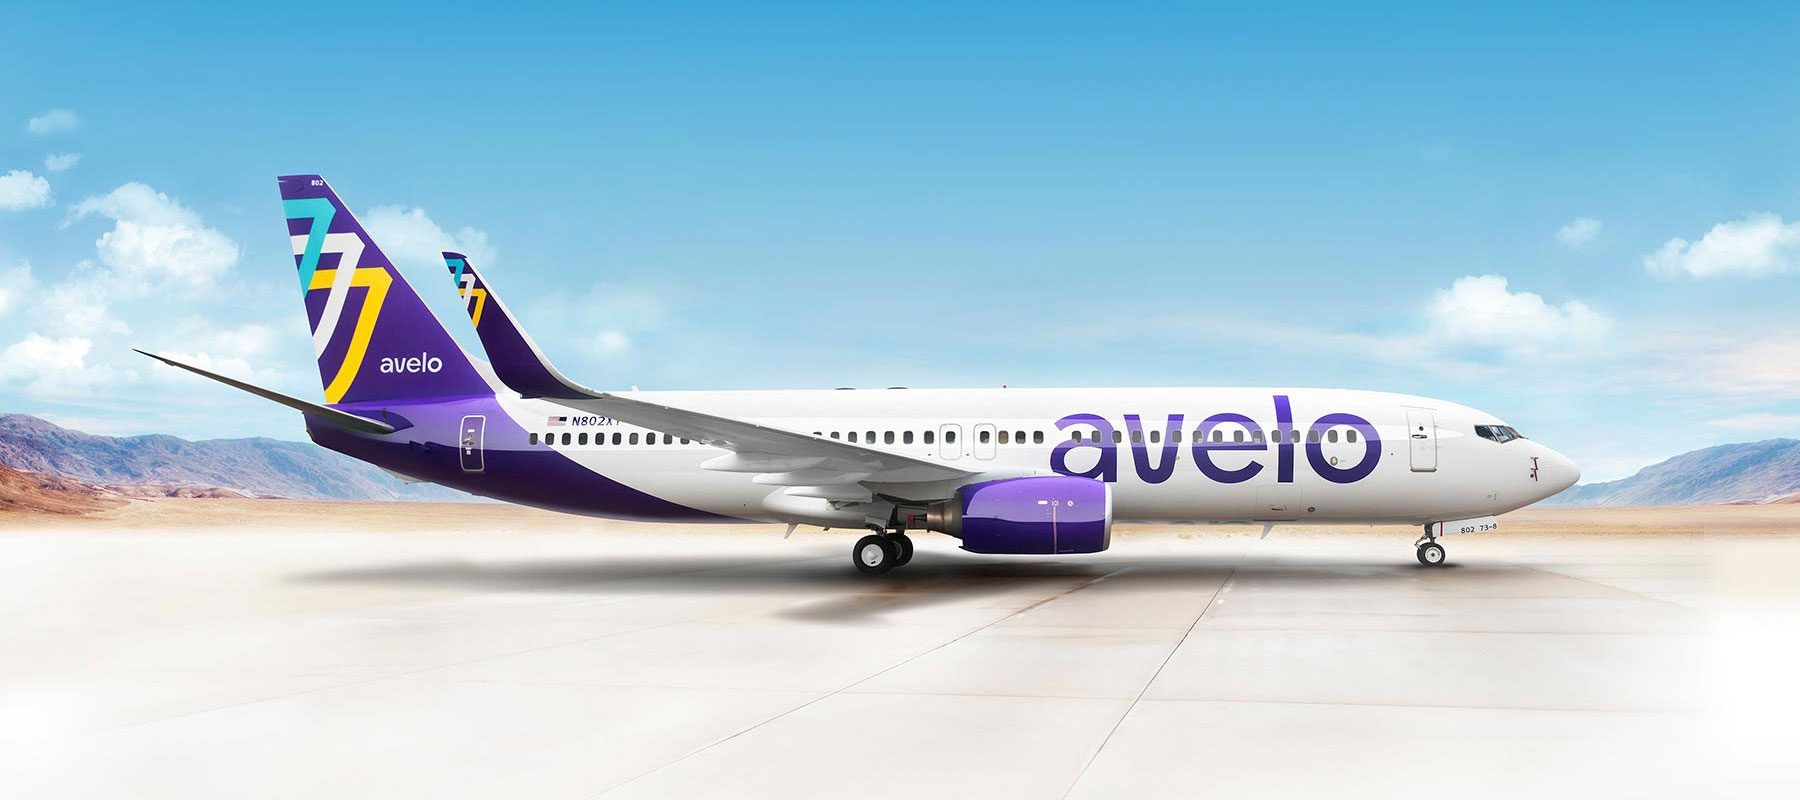 10 Reasons Why Avelo Airlines Is the Best Way to Travel to Las Vegas